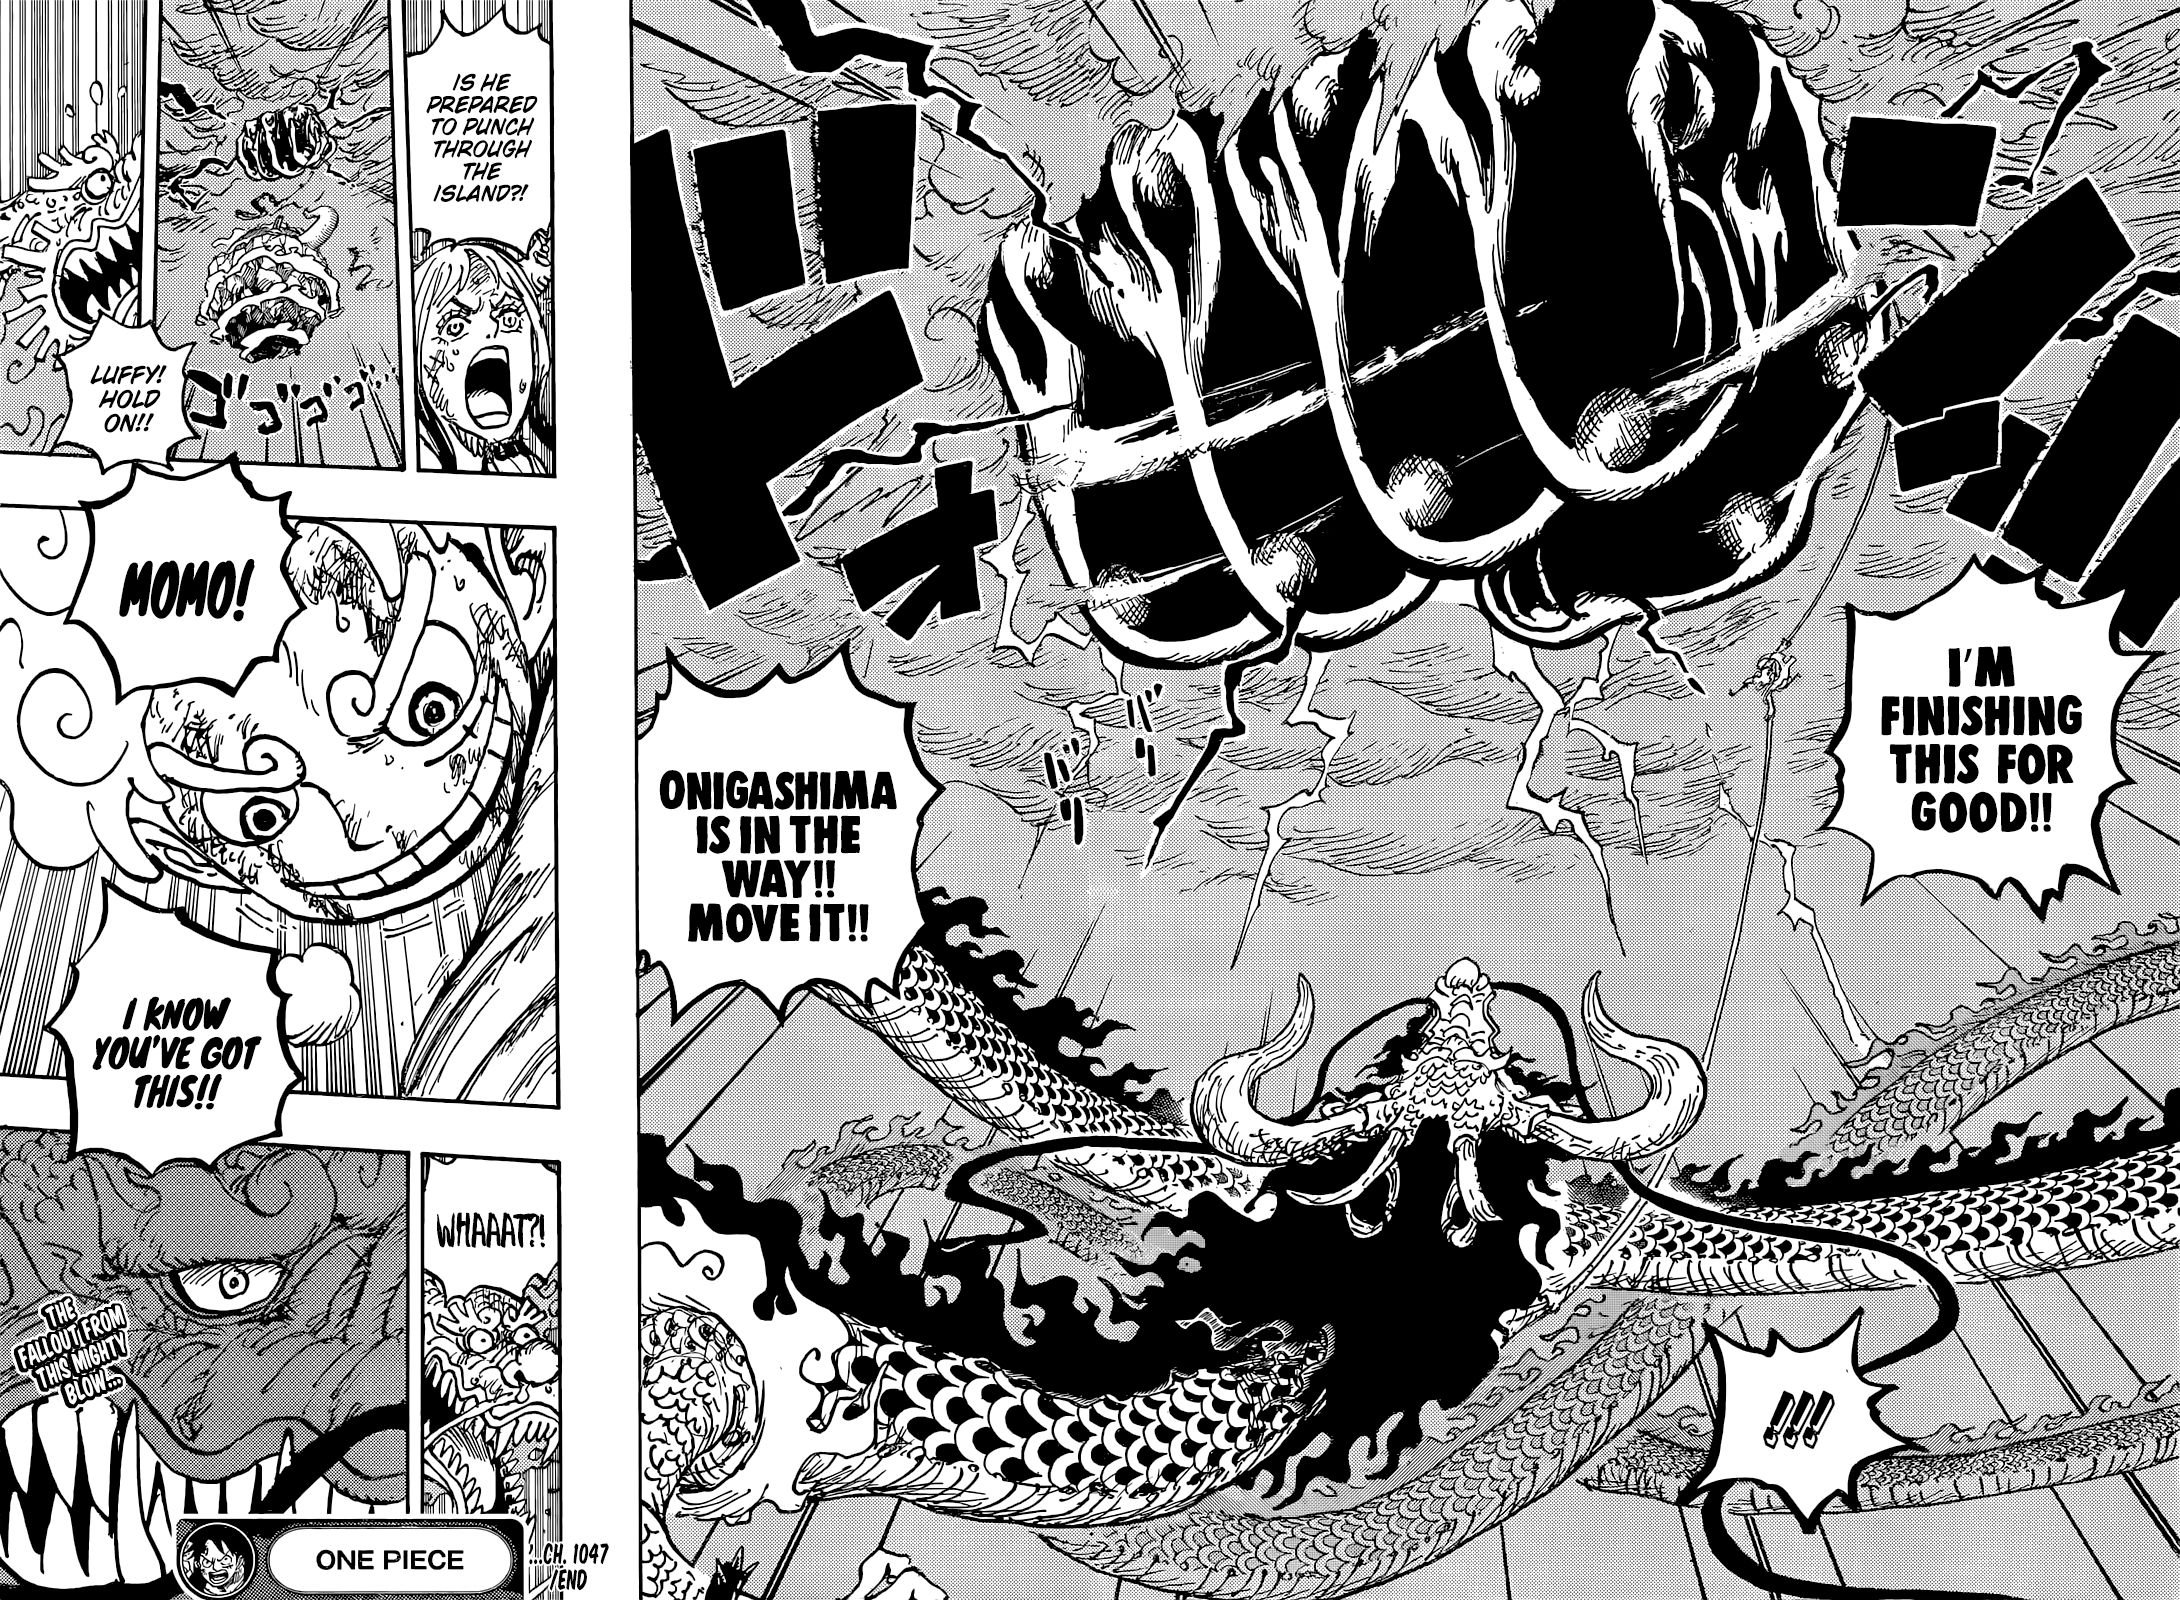 One Piece, Chapter 1047 - chapter 1047 image 18